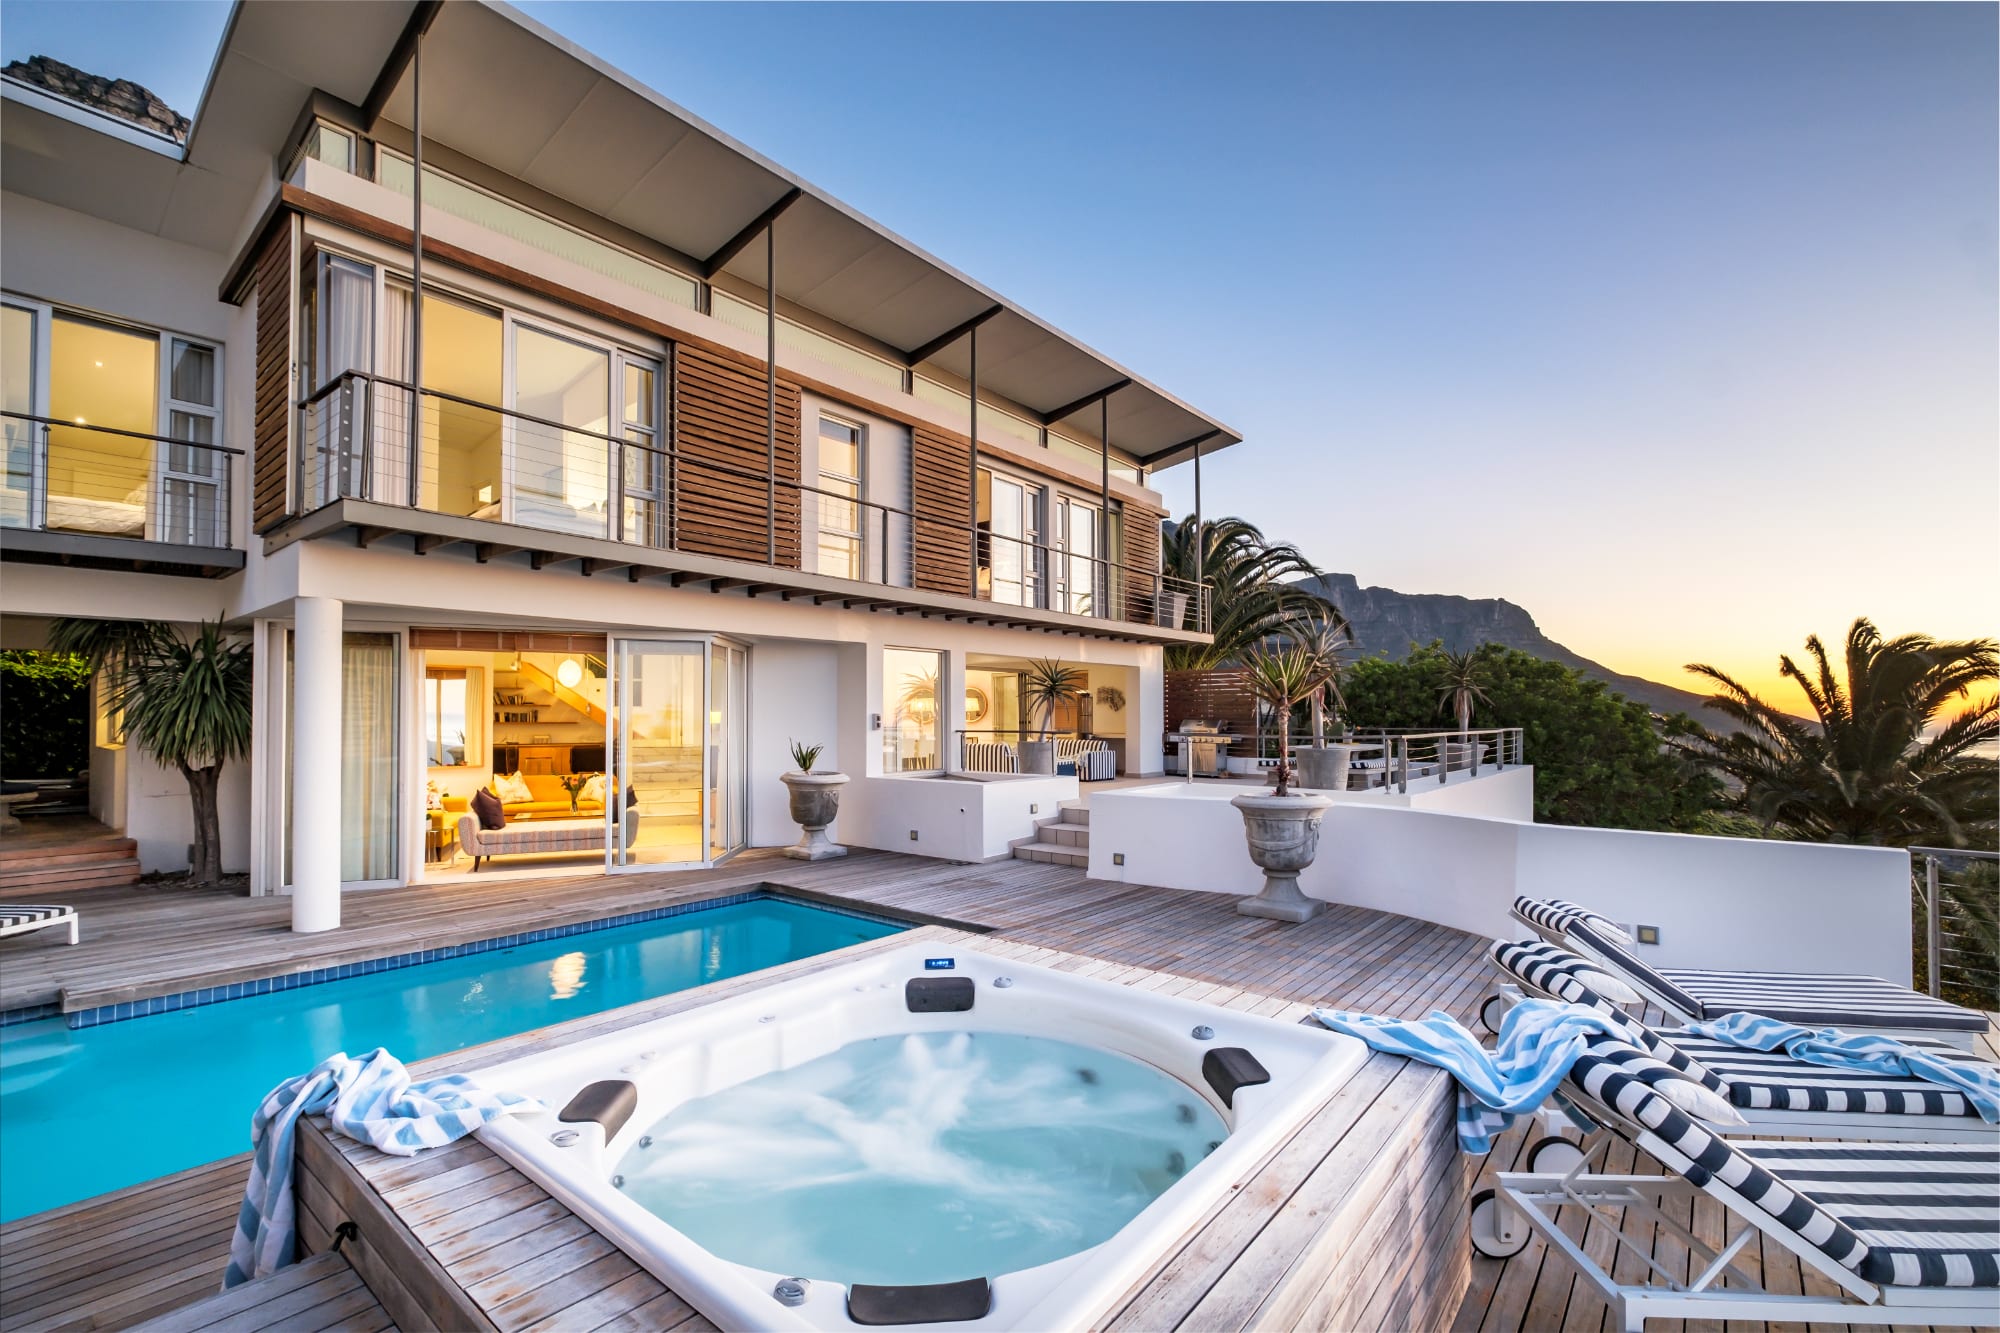 Similar Property Immaculate Camps Bay Villa w Jacuzzi Views and Pool Villa Grenache